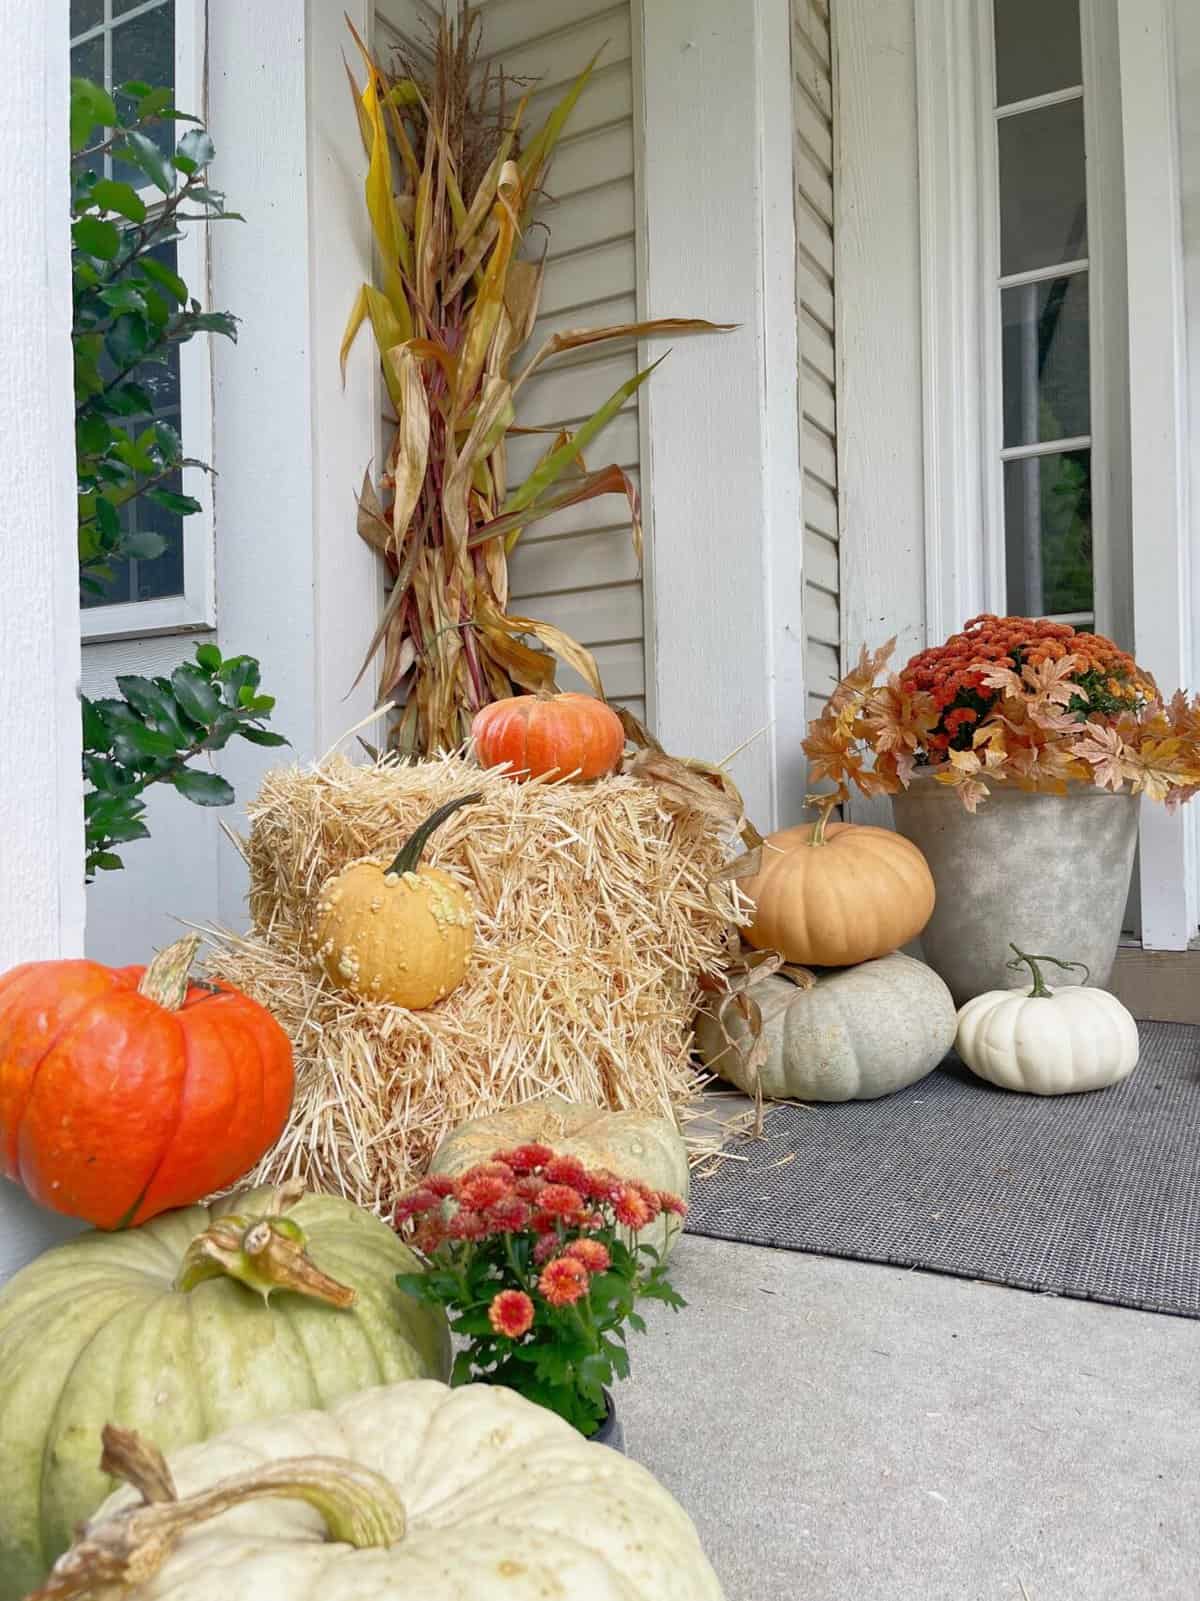 Turn Your Fall Front Porch Into a Pumpkin Patch - Pure Happy Home